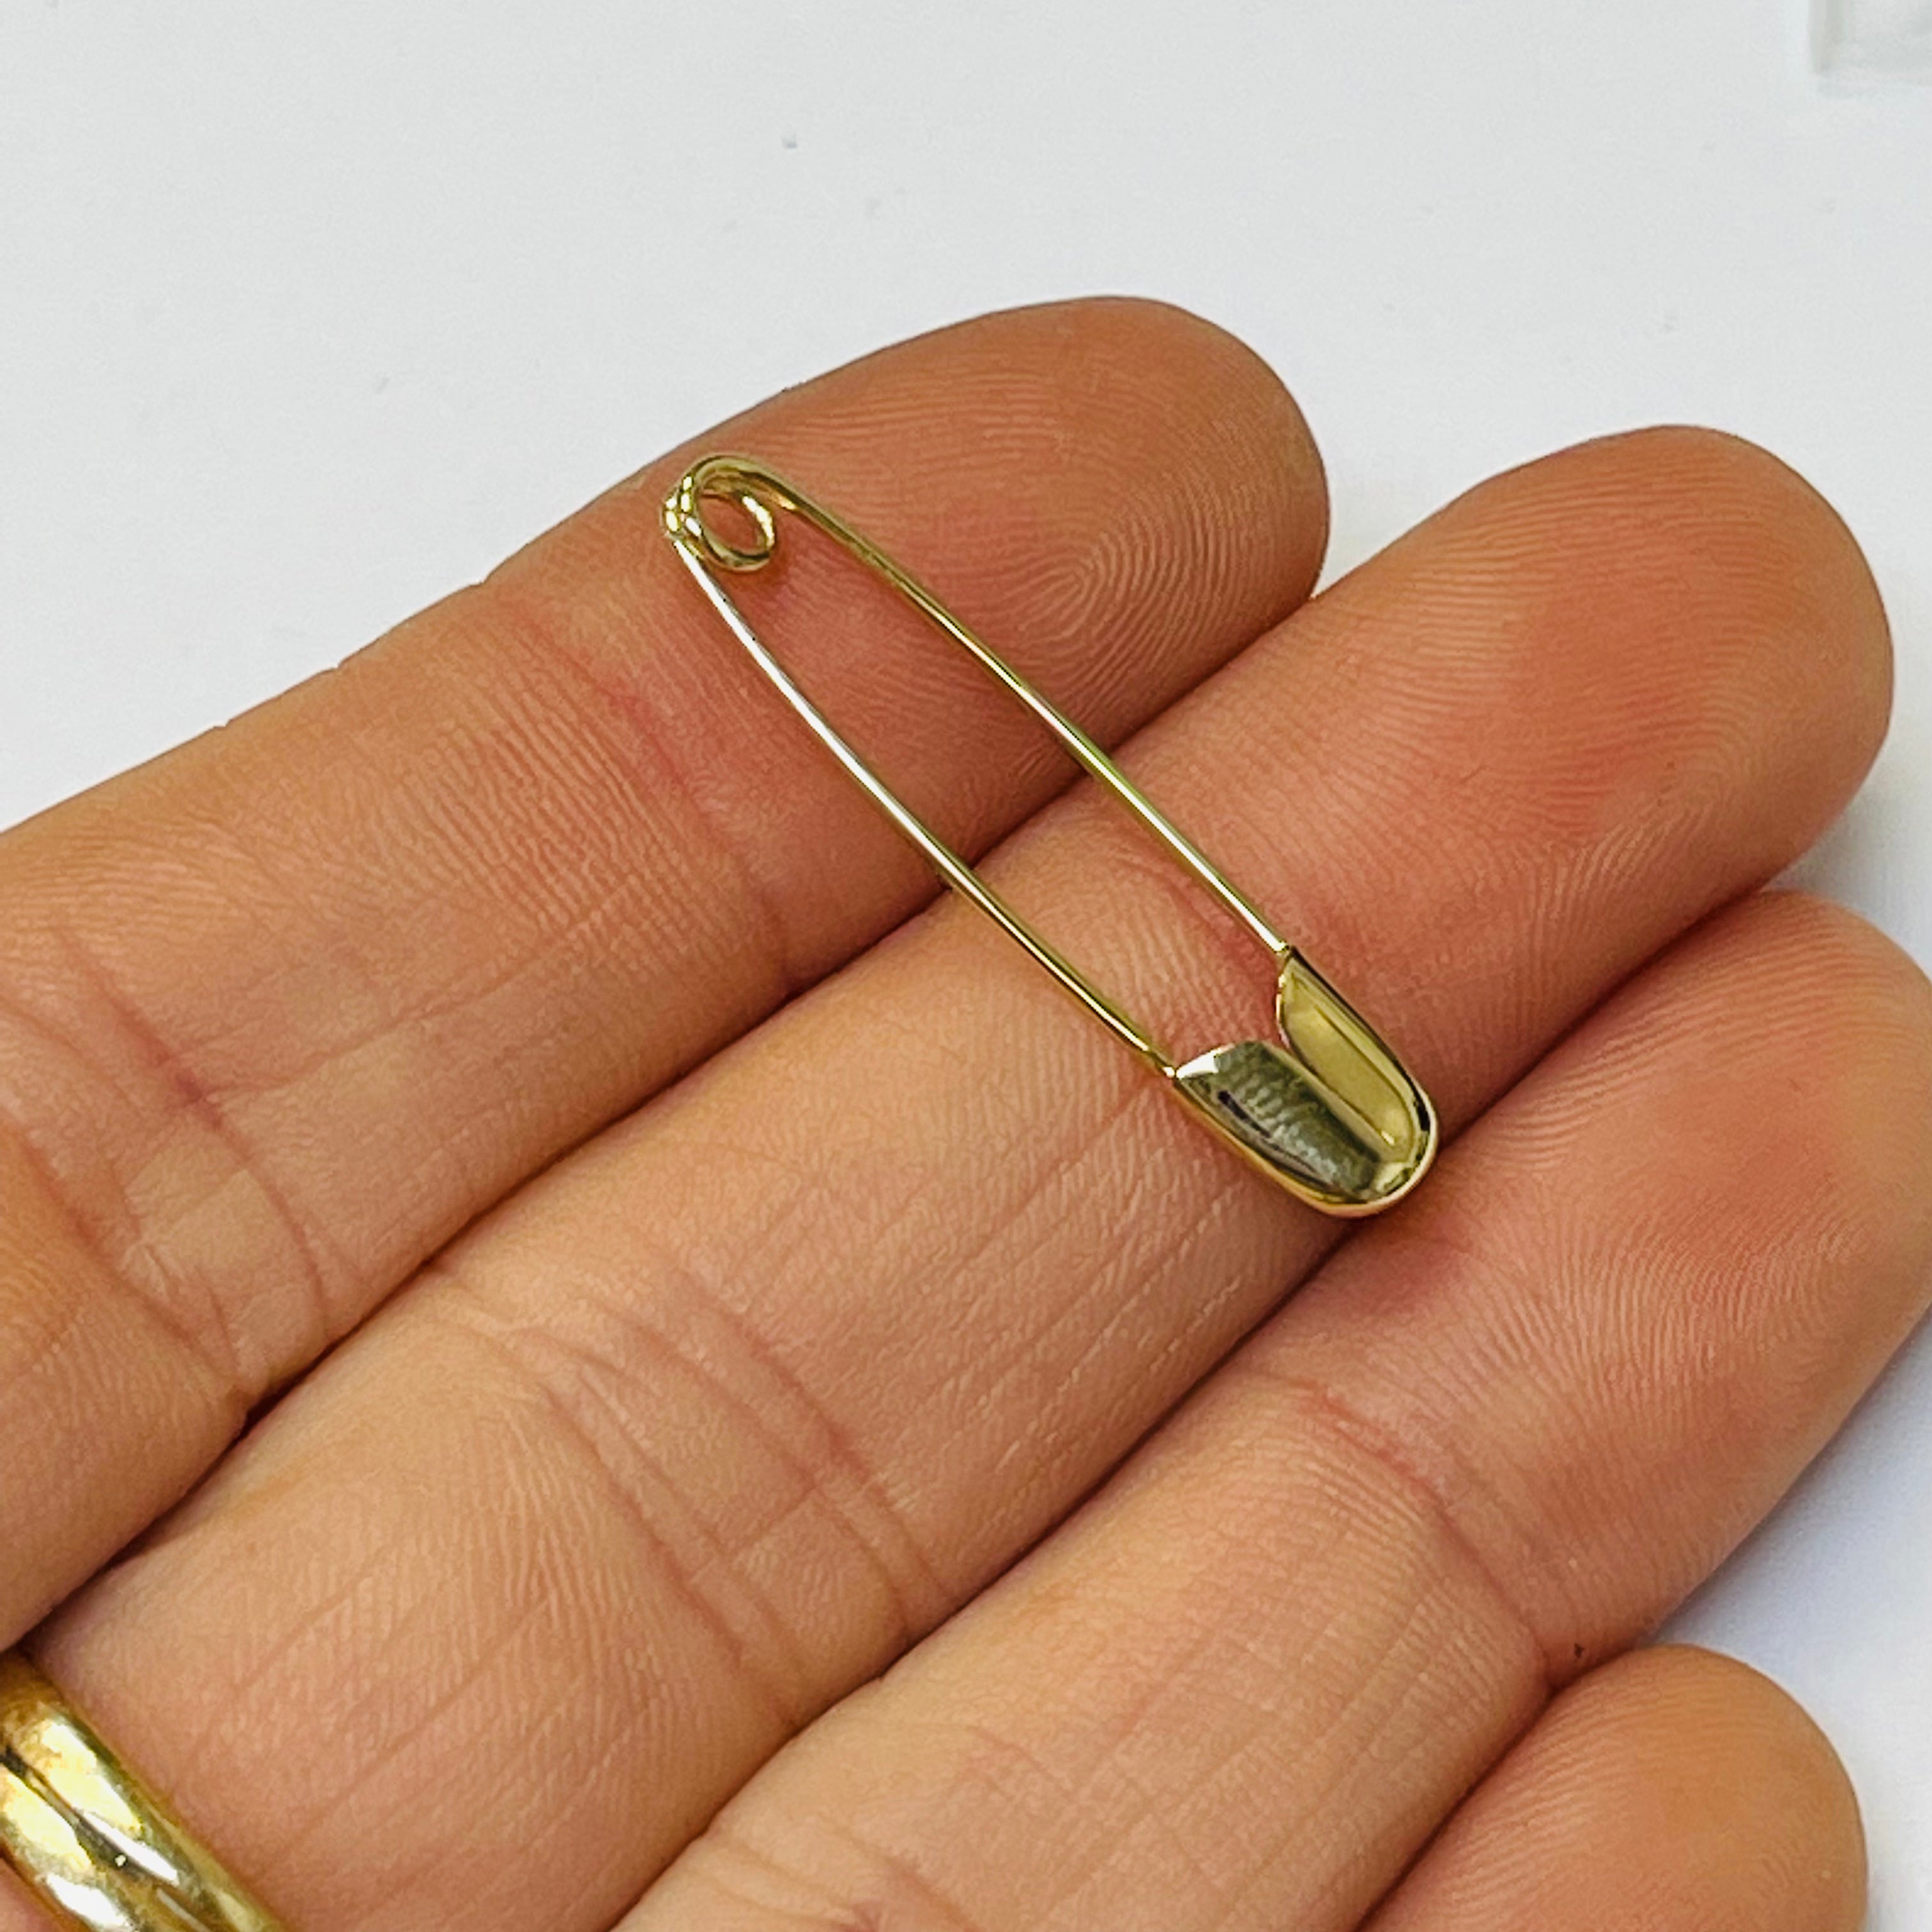 14K Yellow Gold 1.1” 28mm Safety Pin